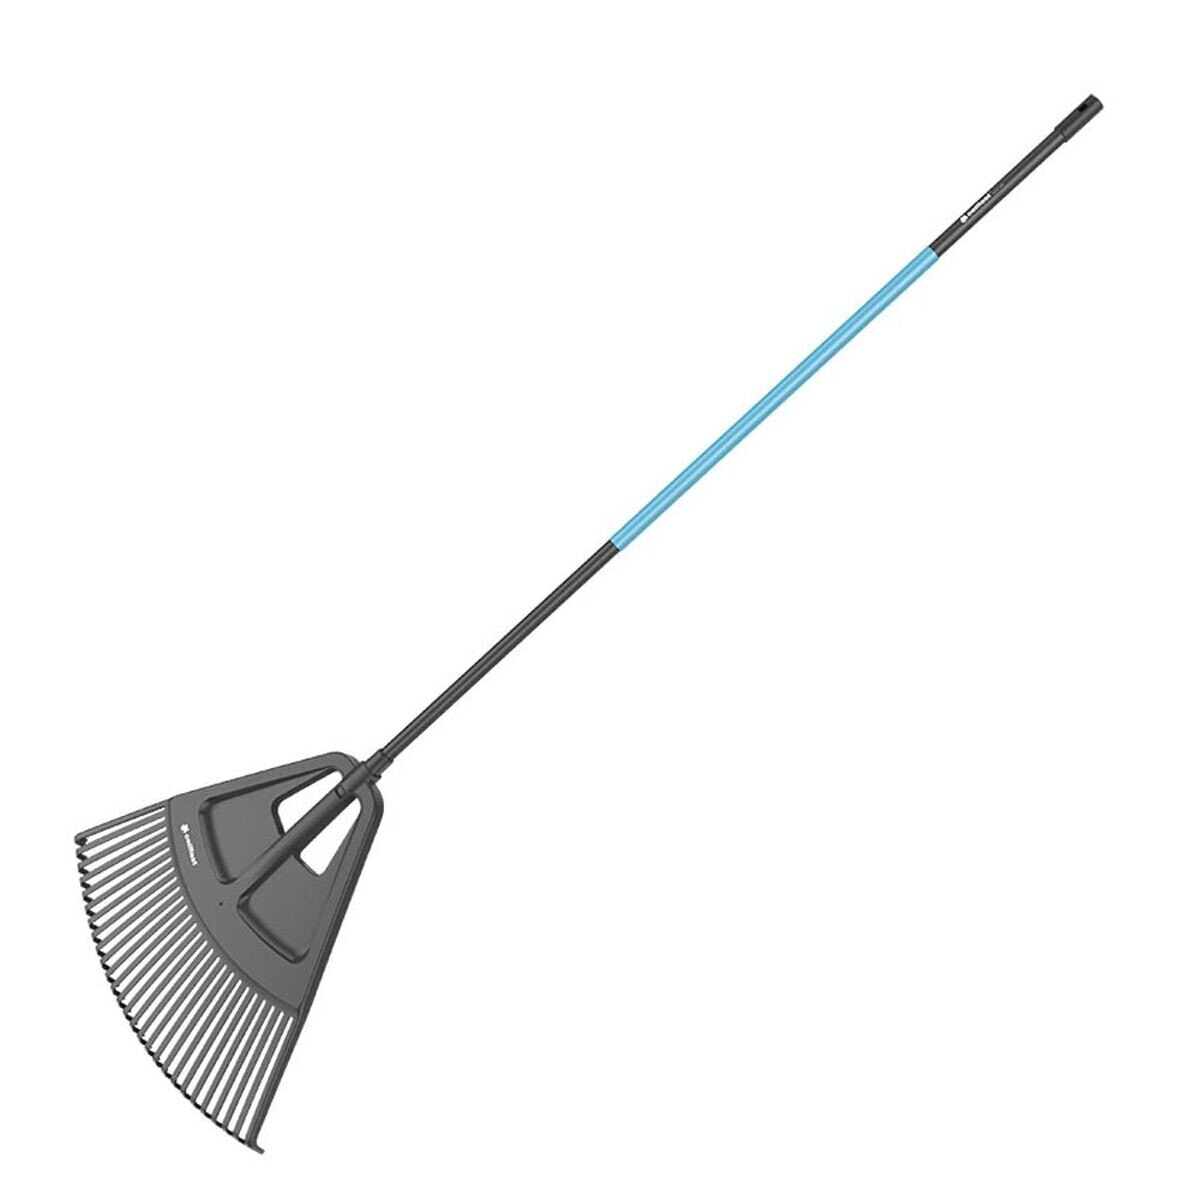 Rake for Collecting Leaves Cellfast Ideal Pro 206 x 65 cm Sweeping Brush